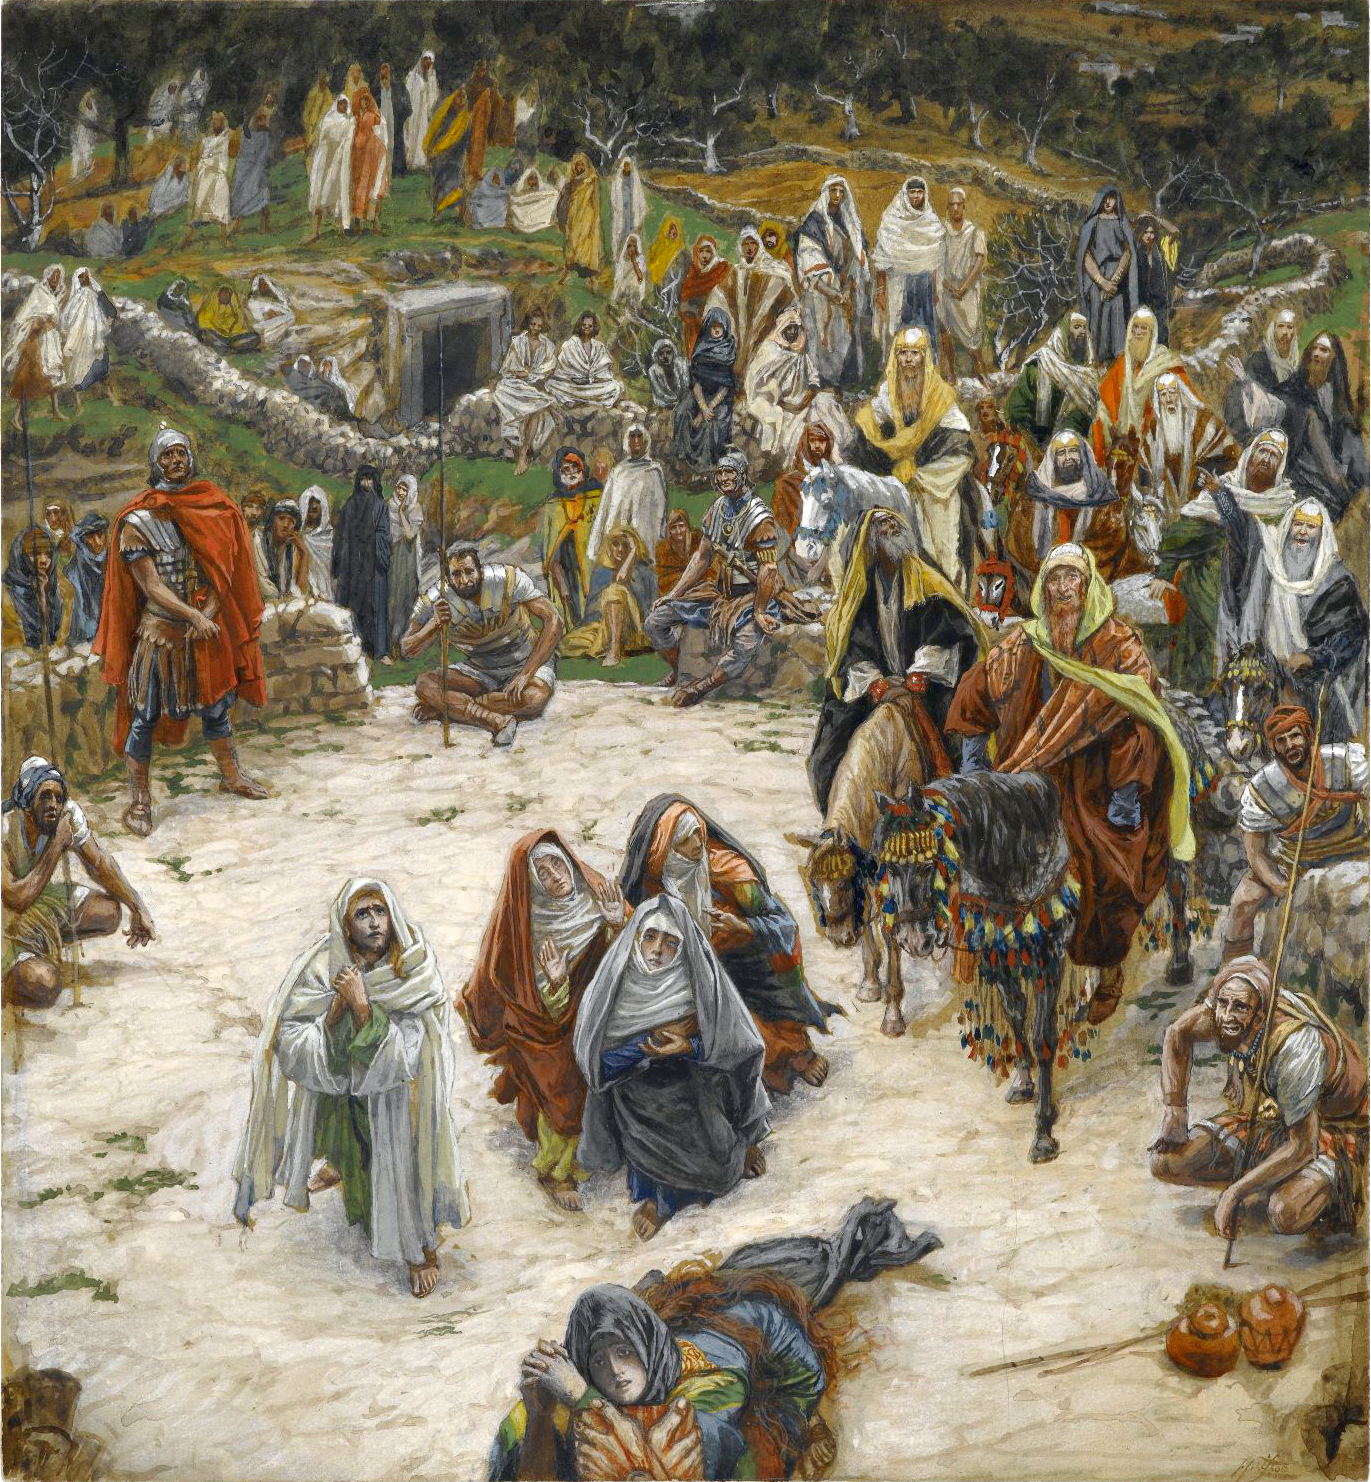 What Our Lord Saw from the Cross by James Tissot - 1886-1894 - 24.8 x 23 cm Brooklyn Museum